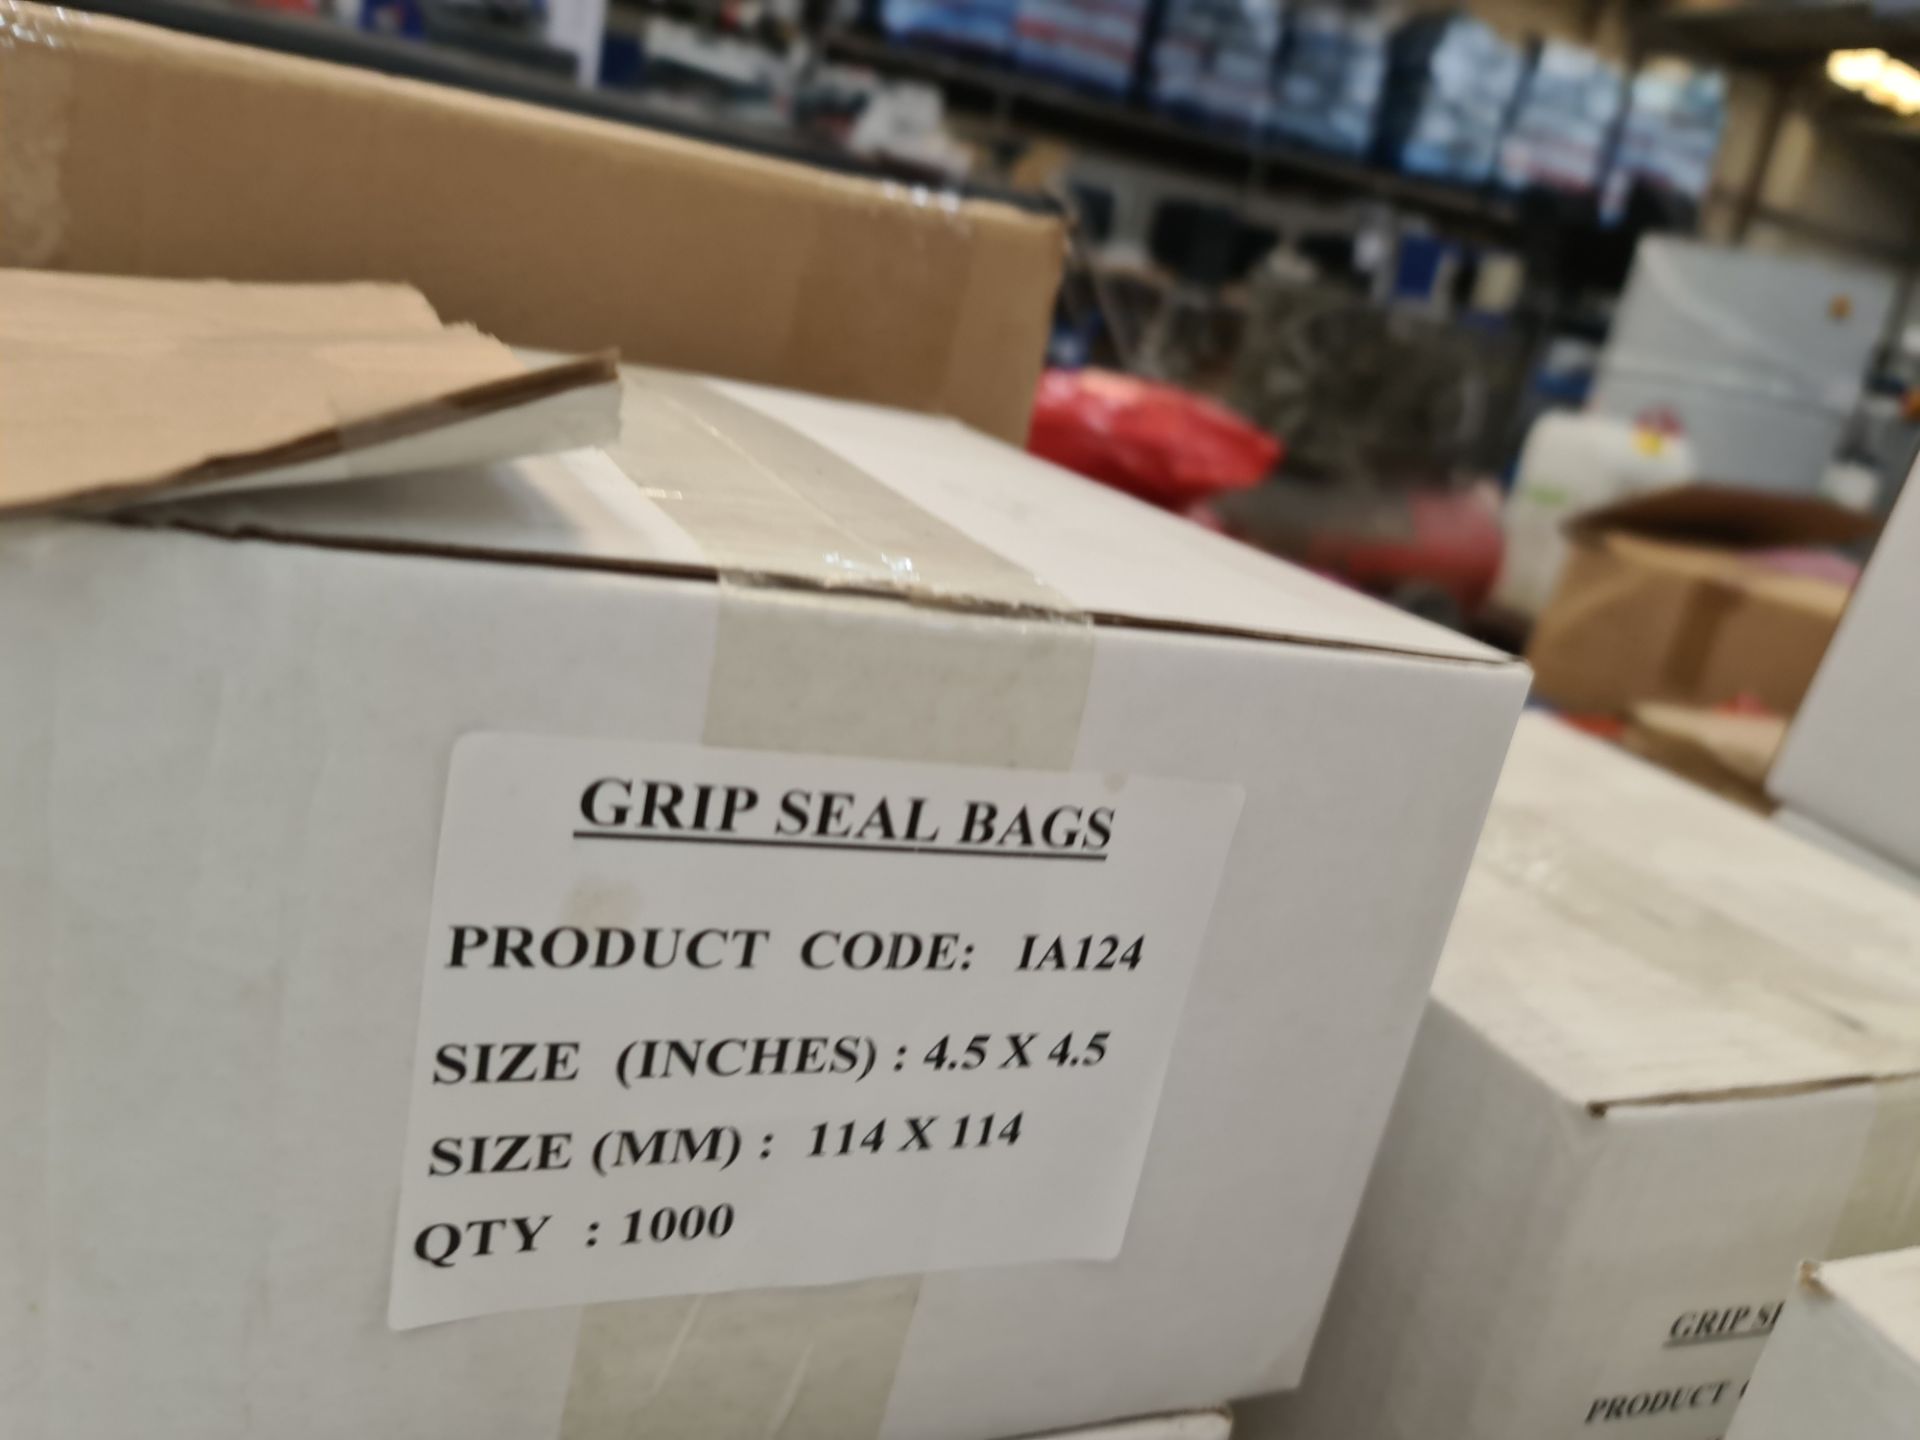 9 boxes of Grip Seal bags - each box contains 1,000 114 x 114mm bags - Image 3 of 4